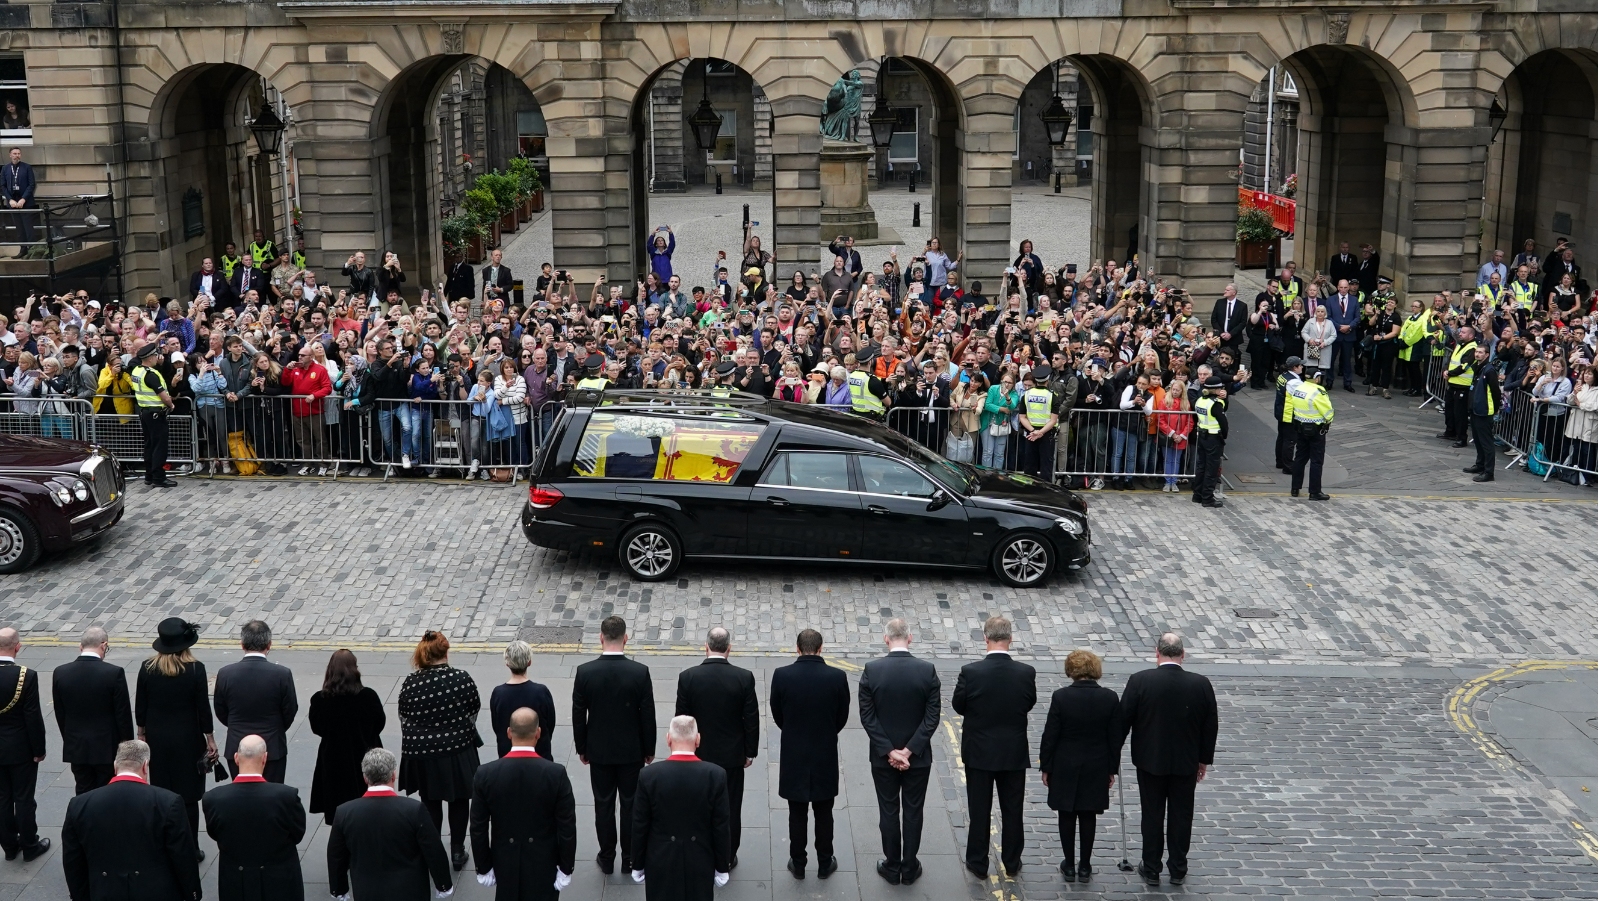 Crowds watch in silence as the cortege makes its way down the Royal Mile.